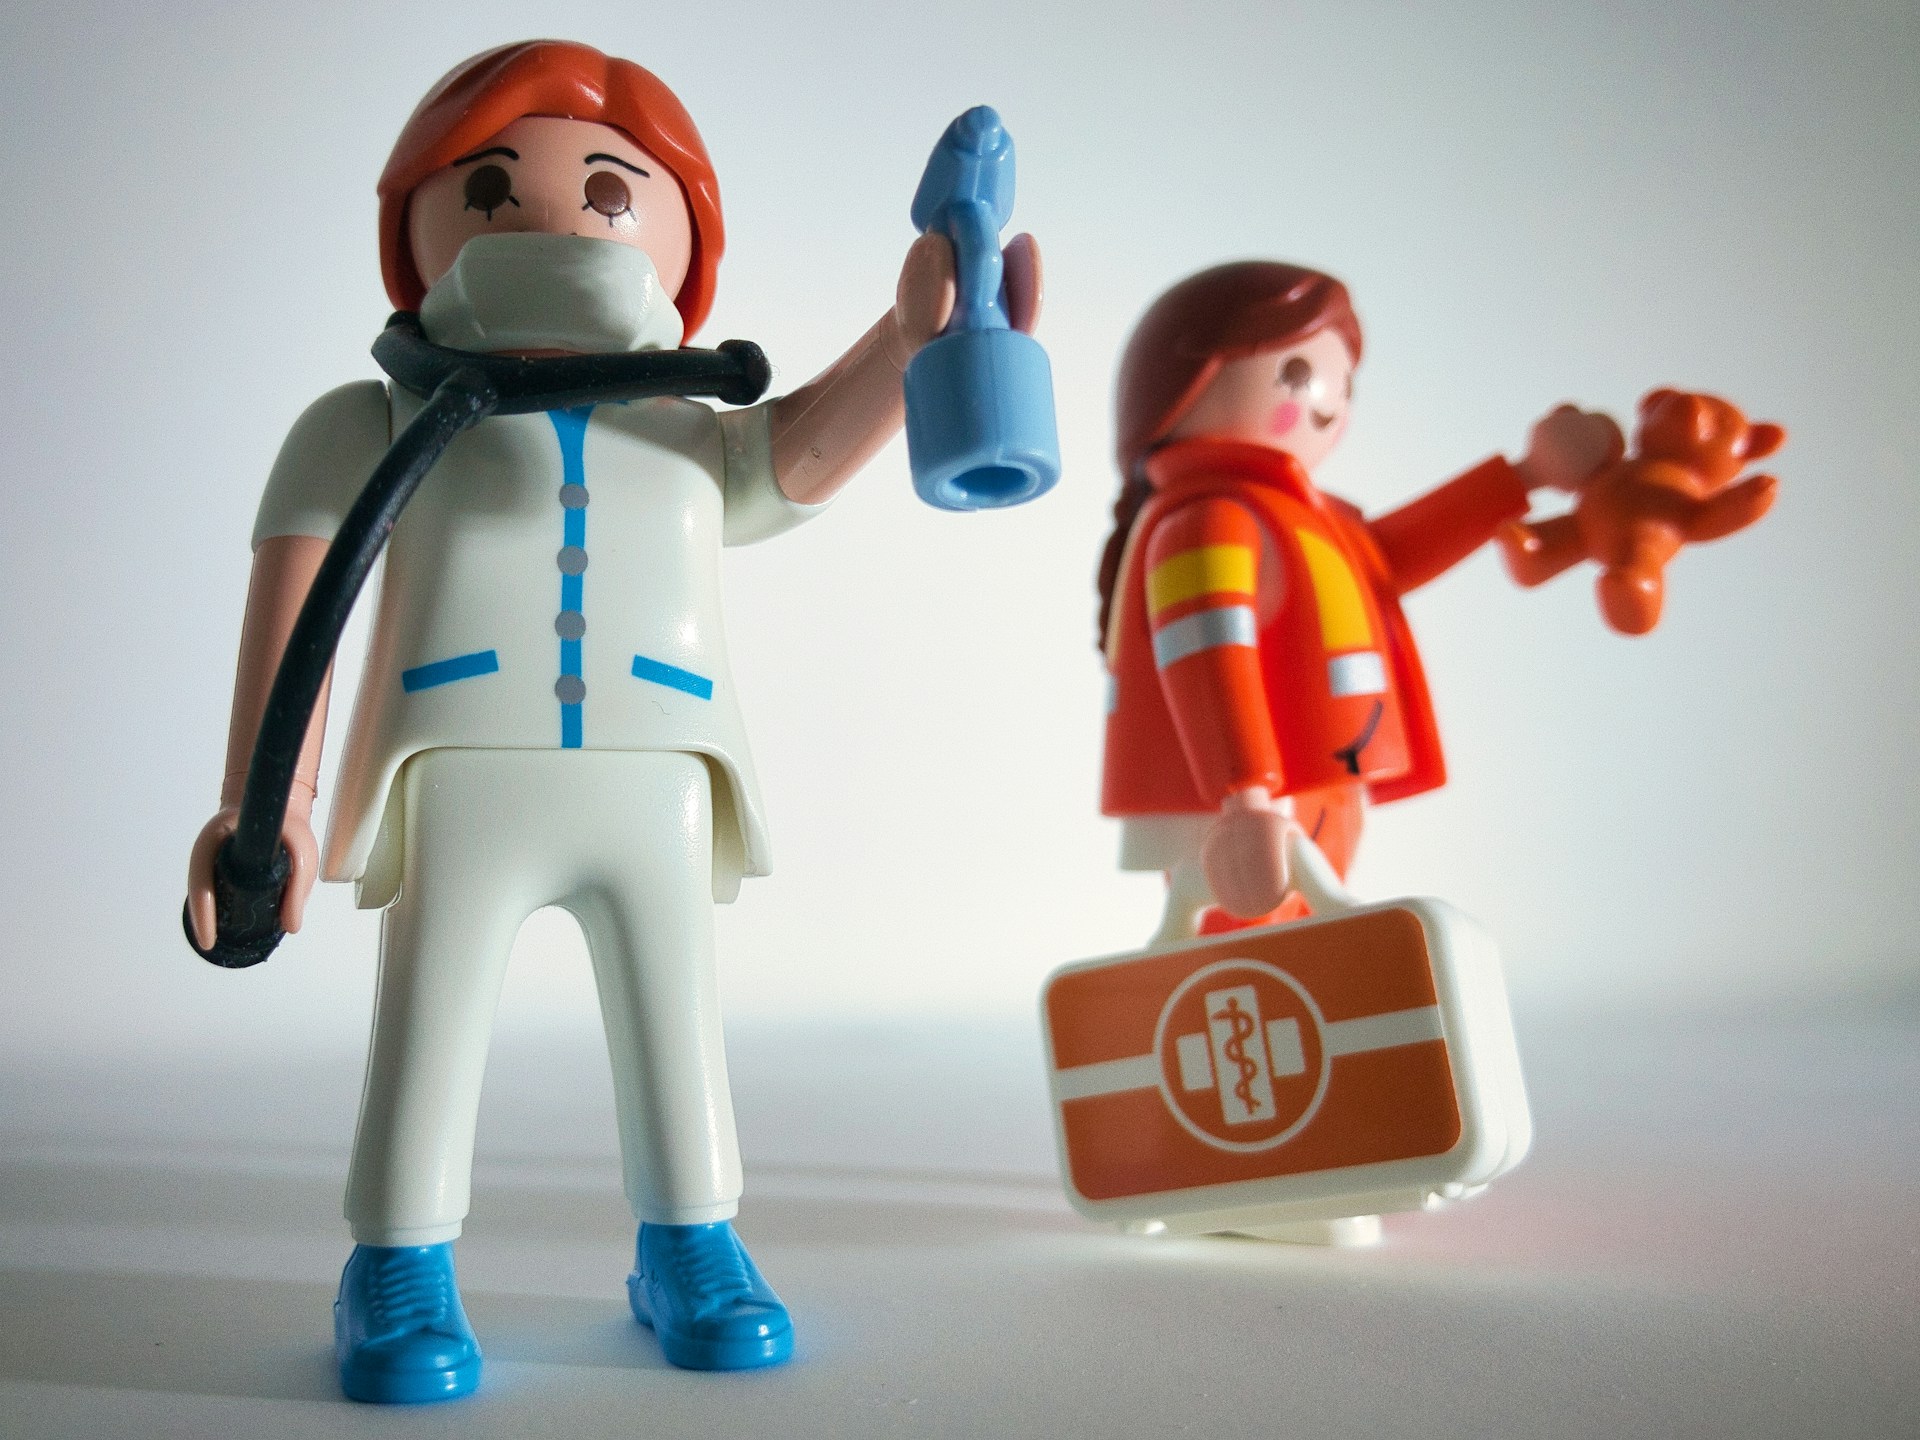 Toy healthcare workers